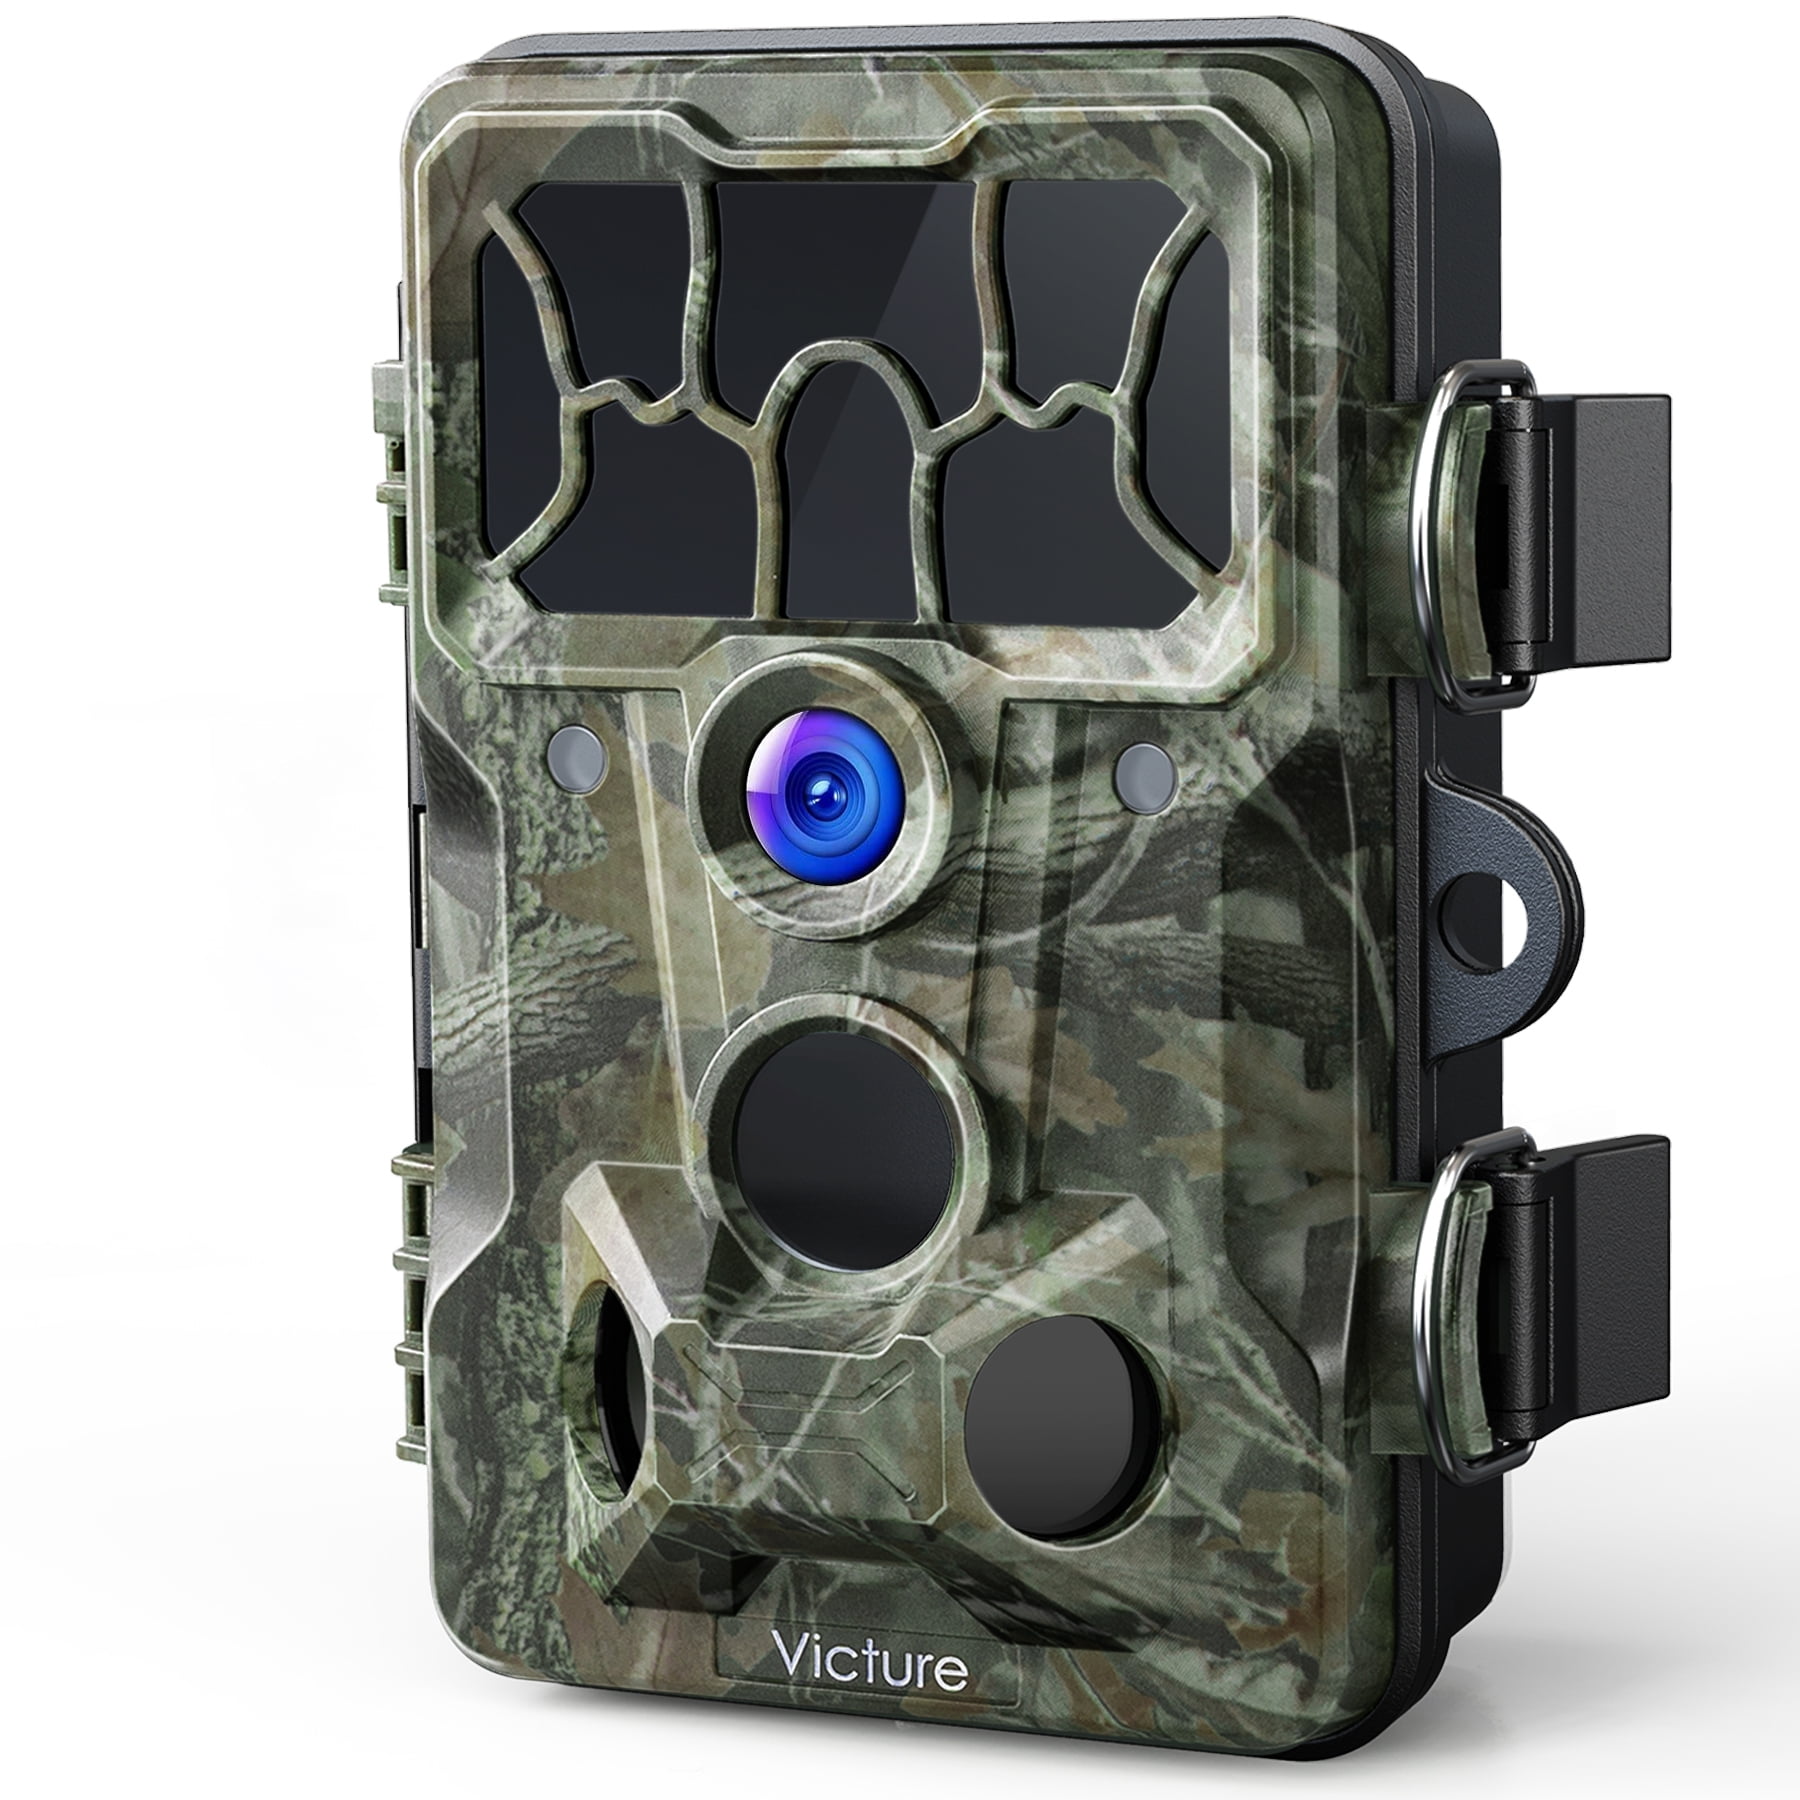 Details about   20MP HD 1080P Hunting Trail Camera Wildlife Security Home Farm Night Vision Game 